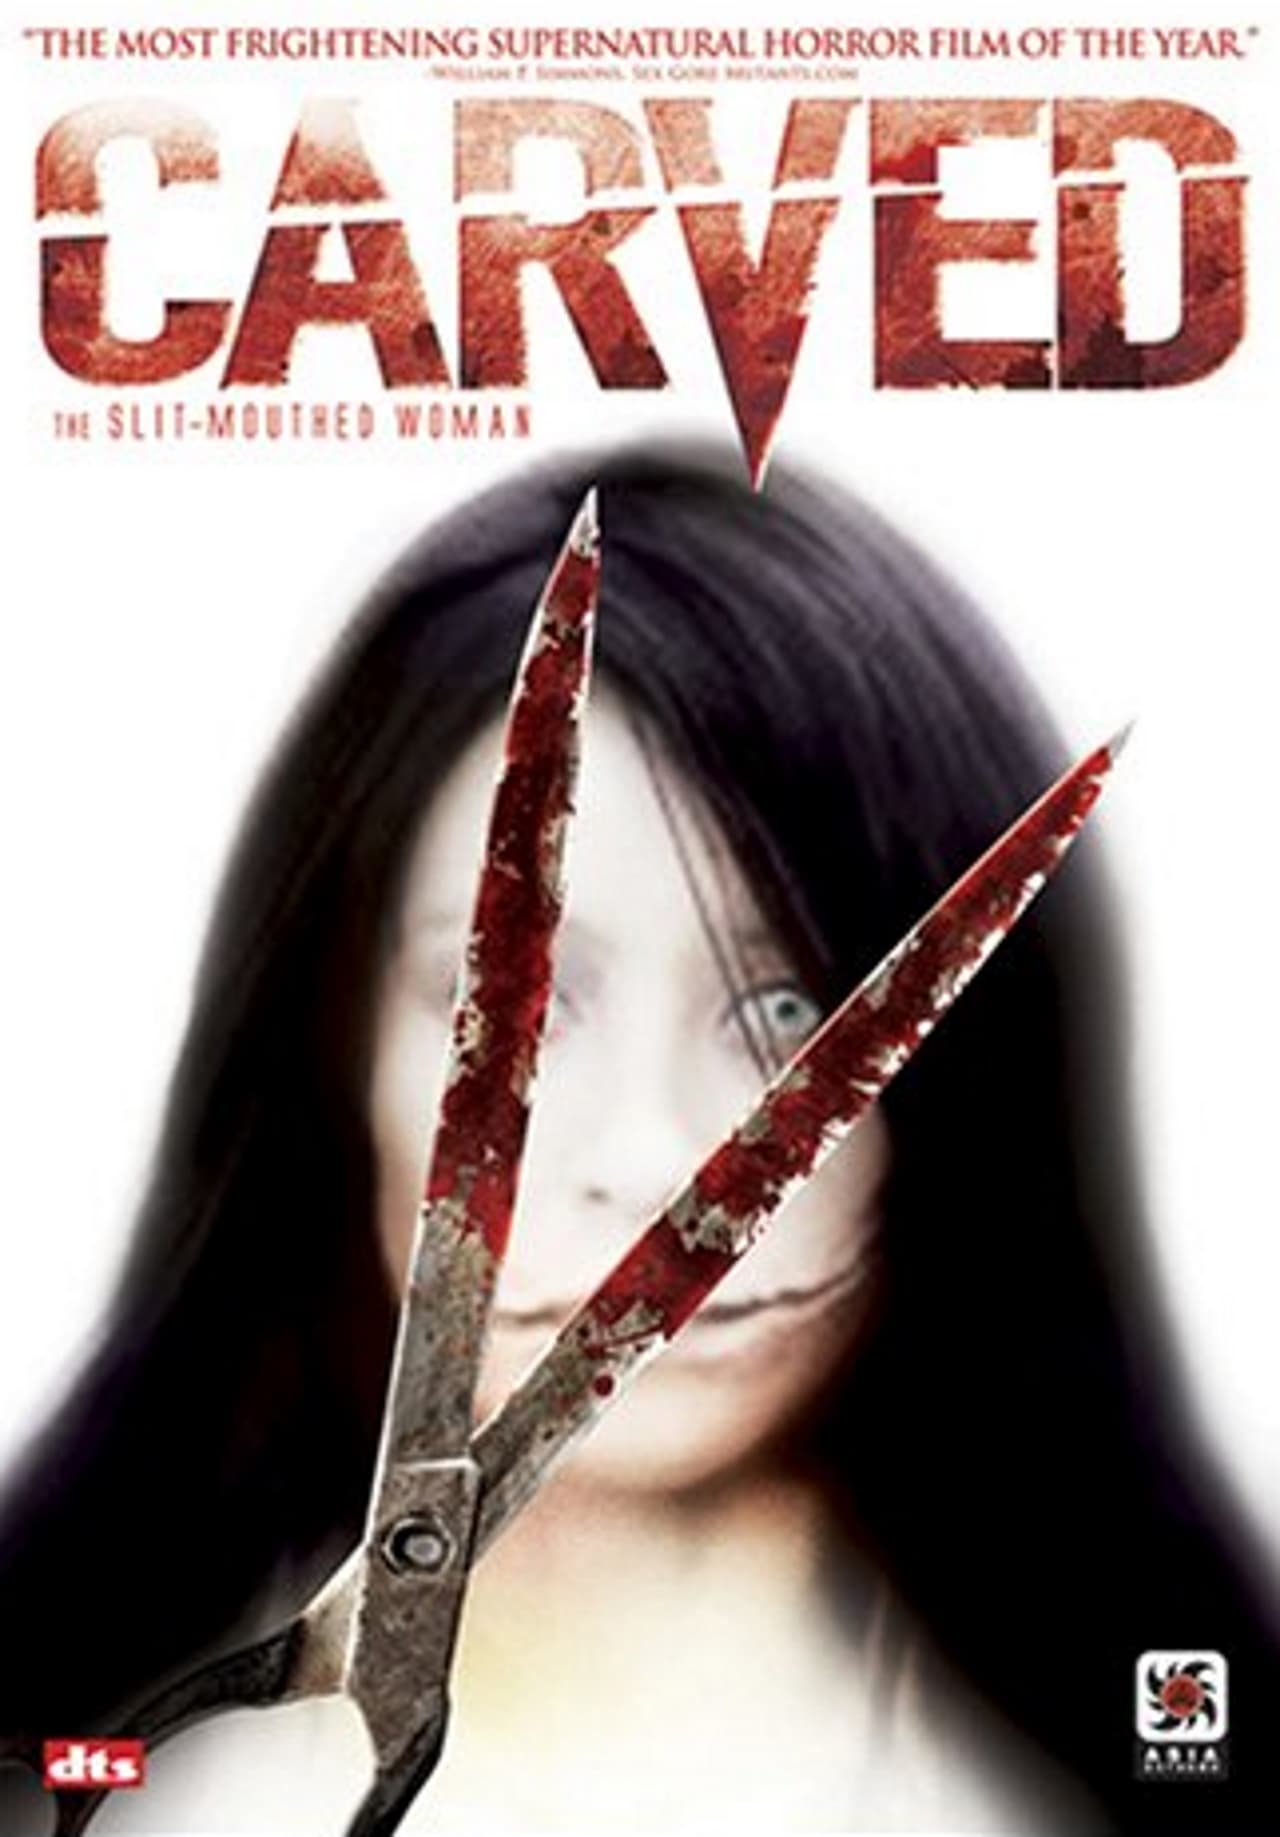 Carved: The Slit-Mouthed Woman